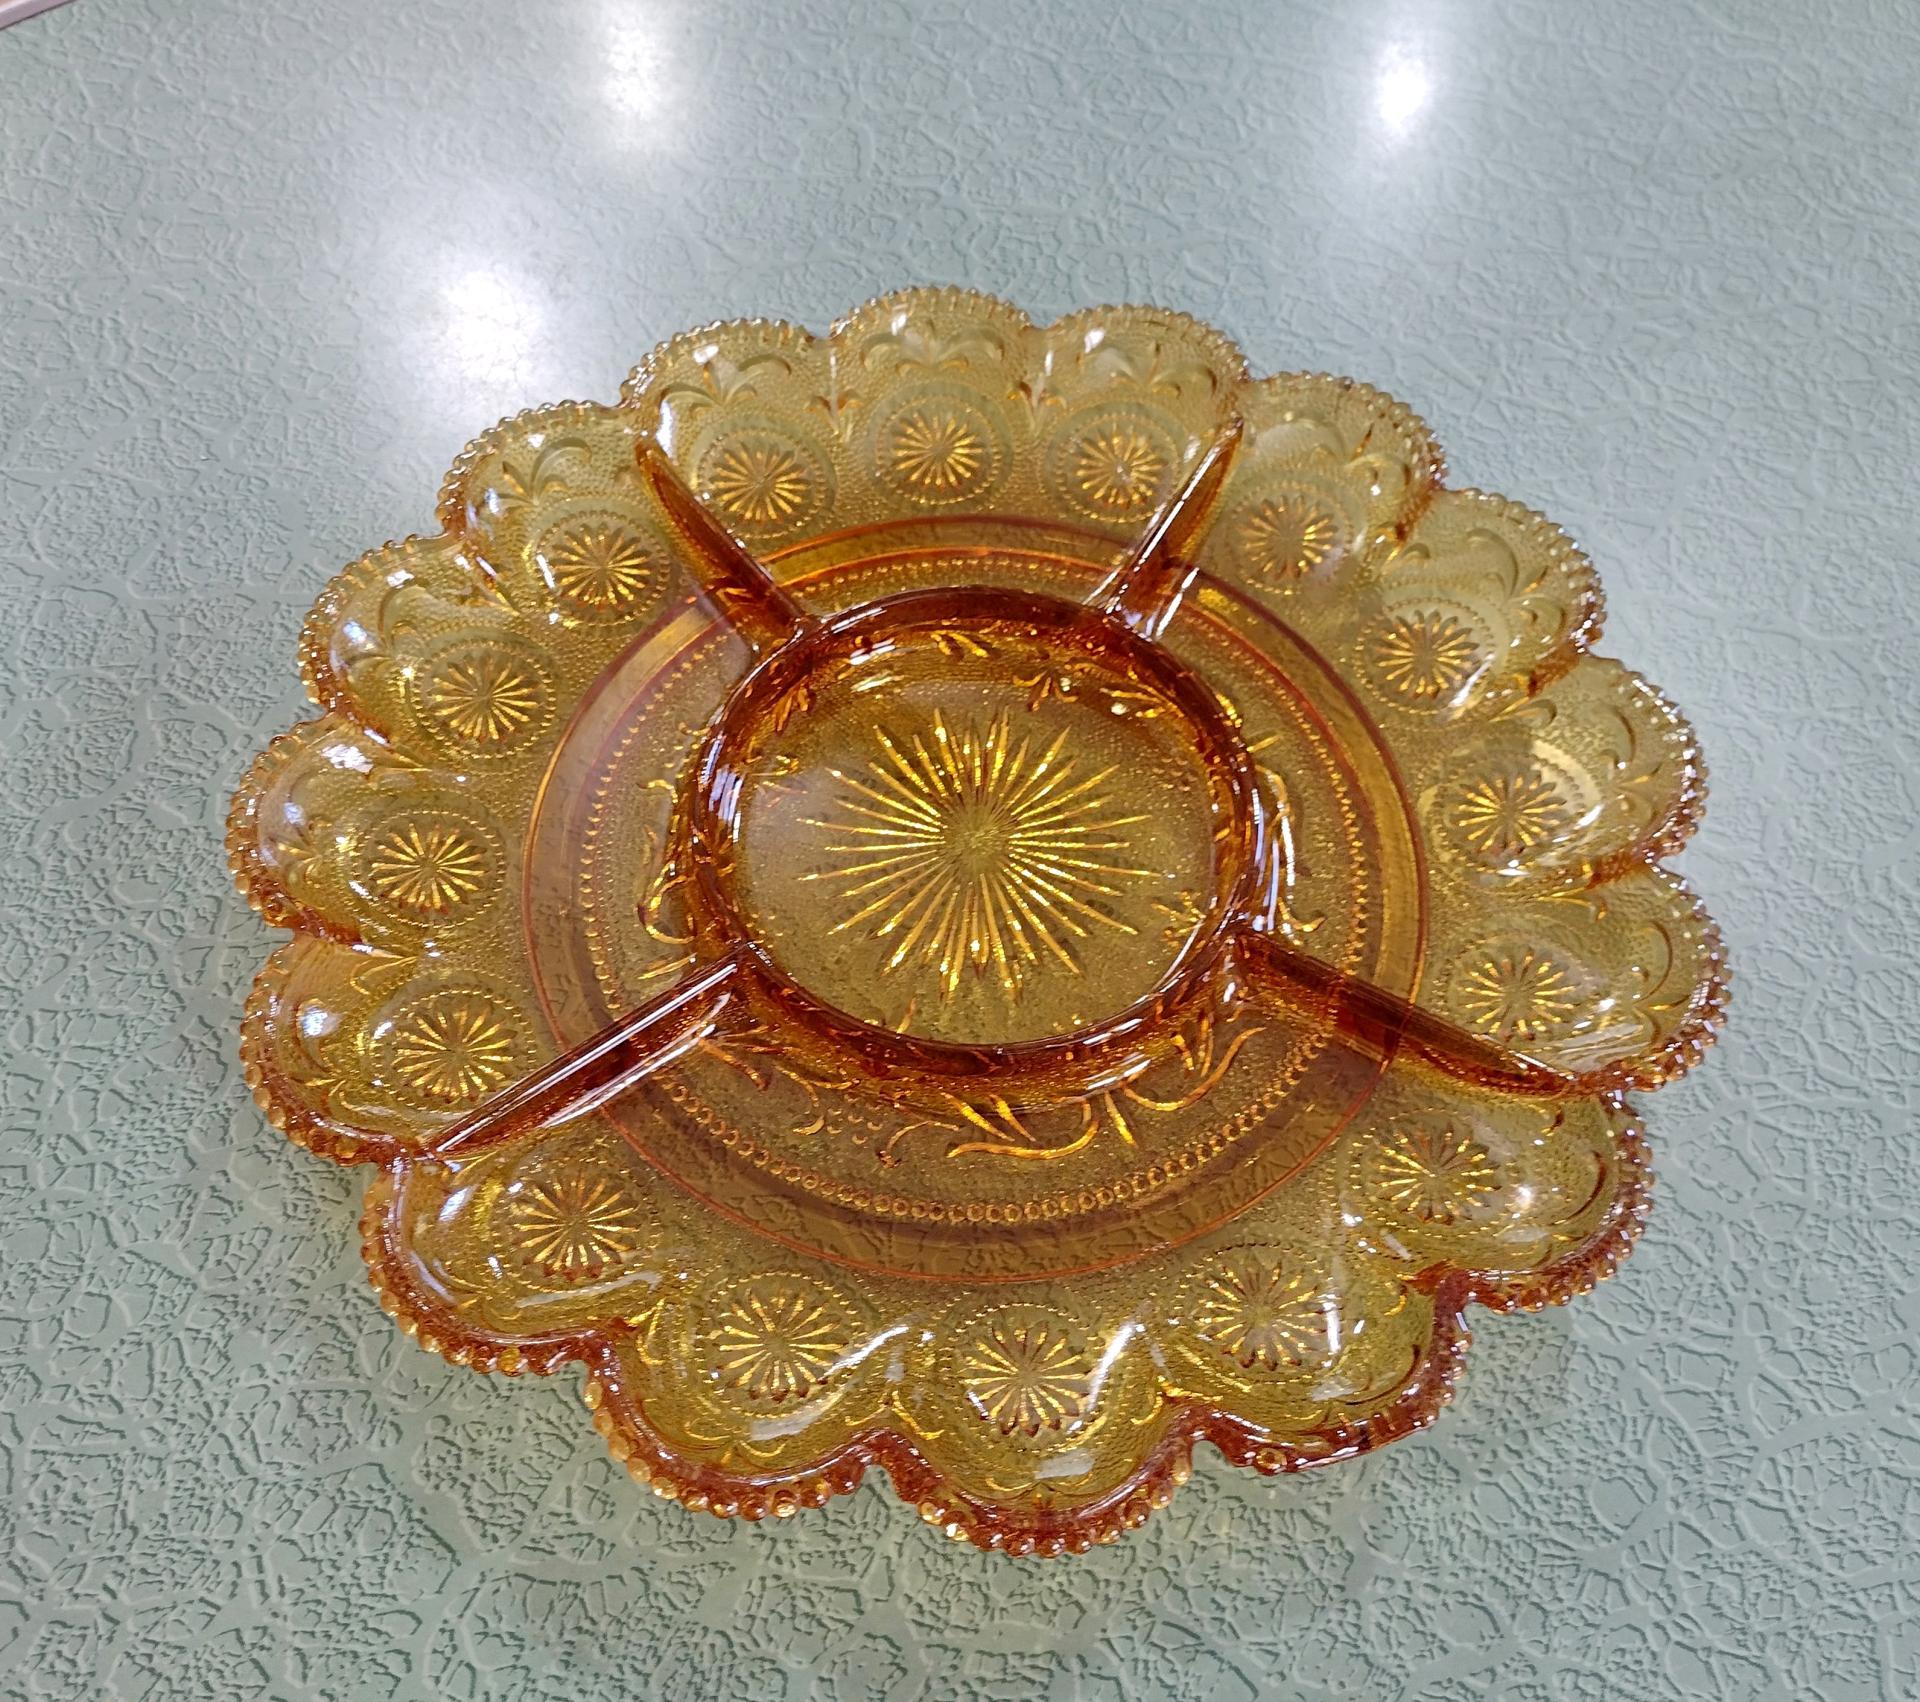 Vintage Indiana Glass Brockway American Concord Amber Relish Dish, 5 Part Divided Glass Relish Tray